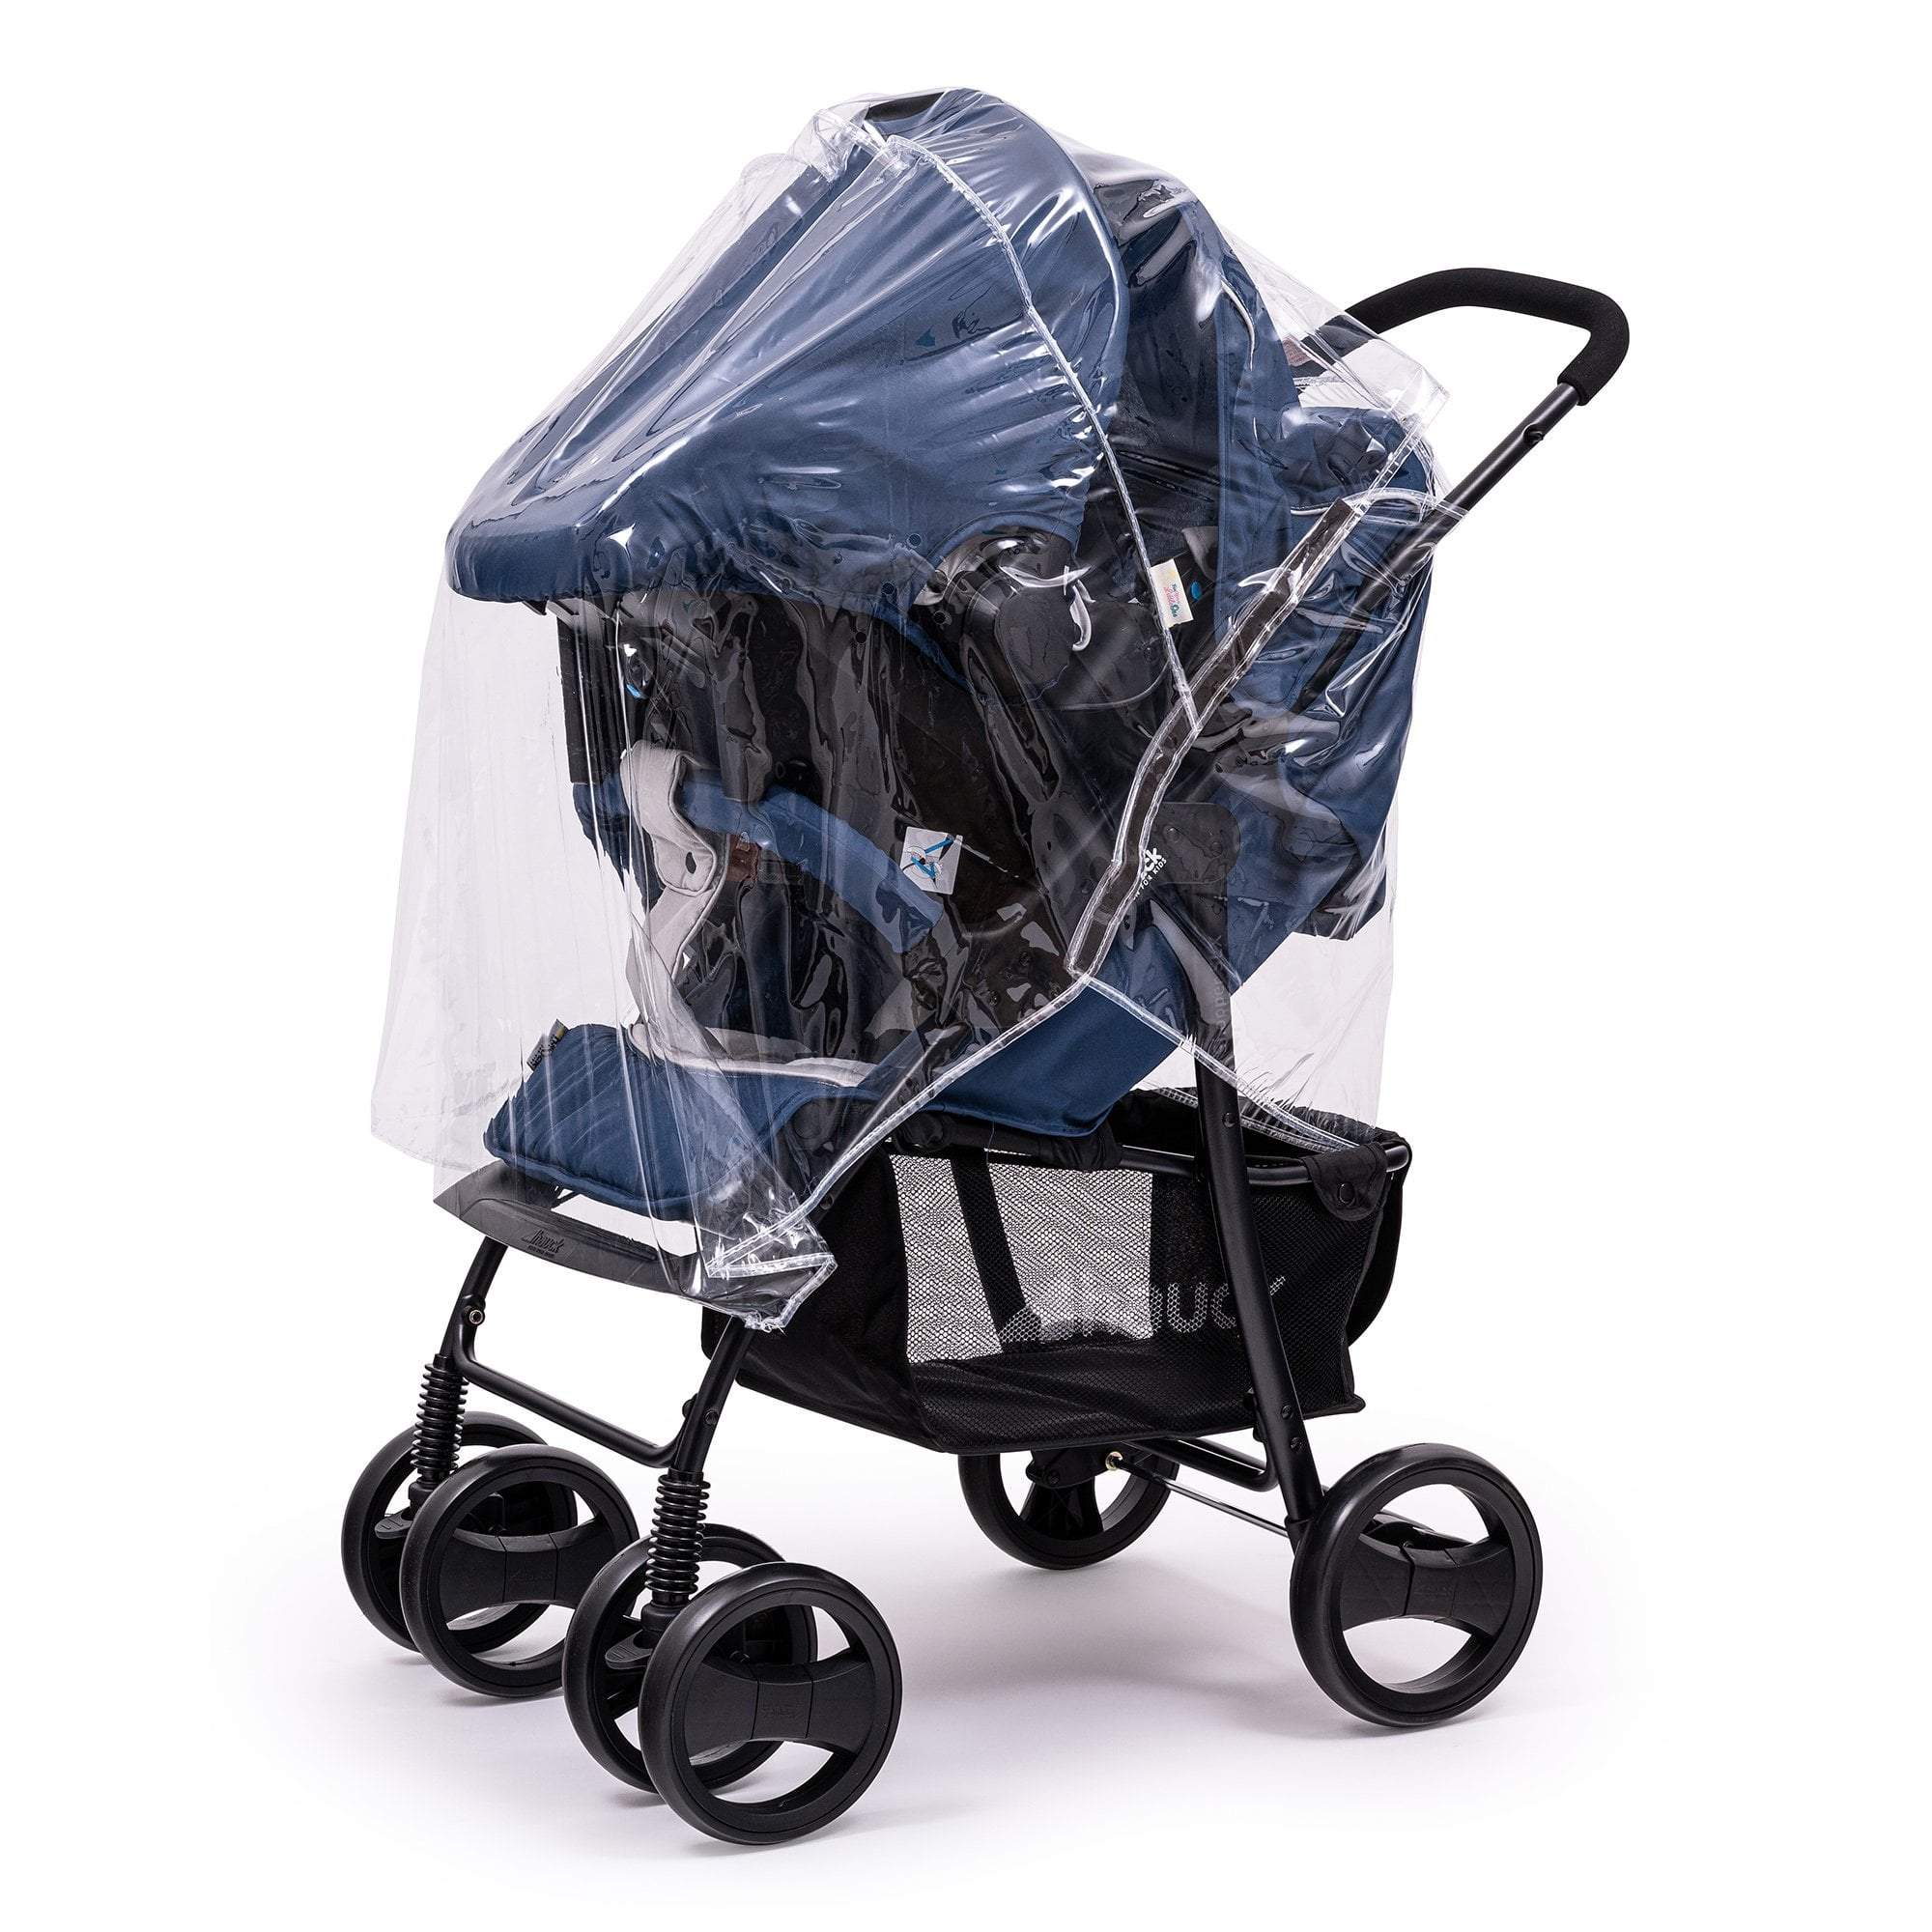 Travel System Raincover Compatible with Infababy - Fits All Models -  | For Your Little One